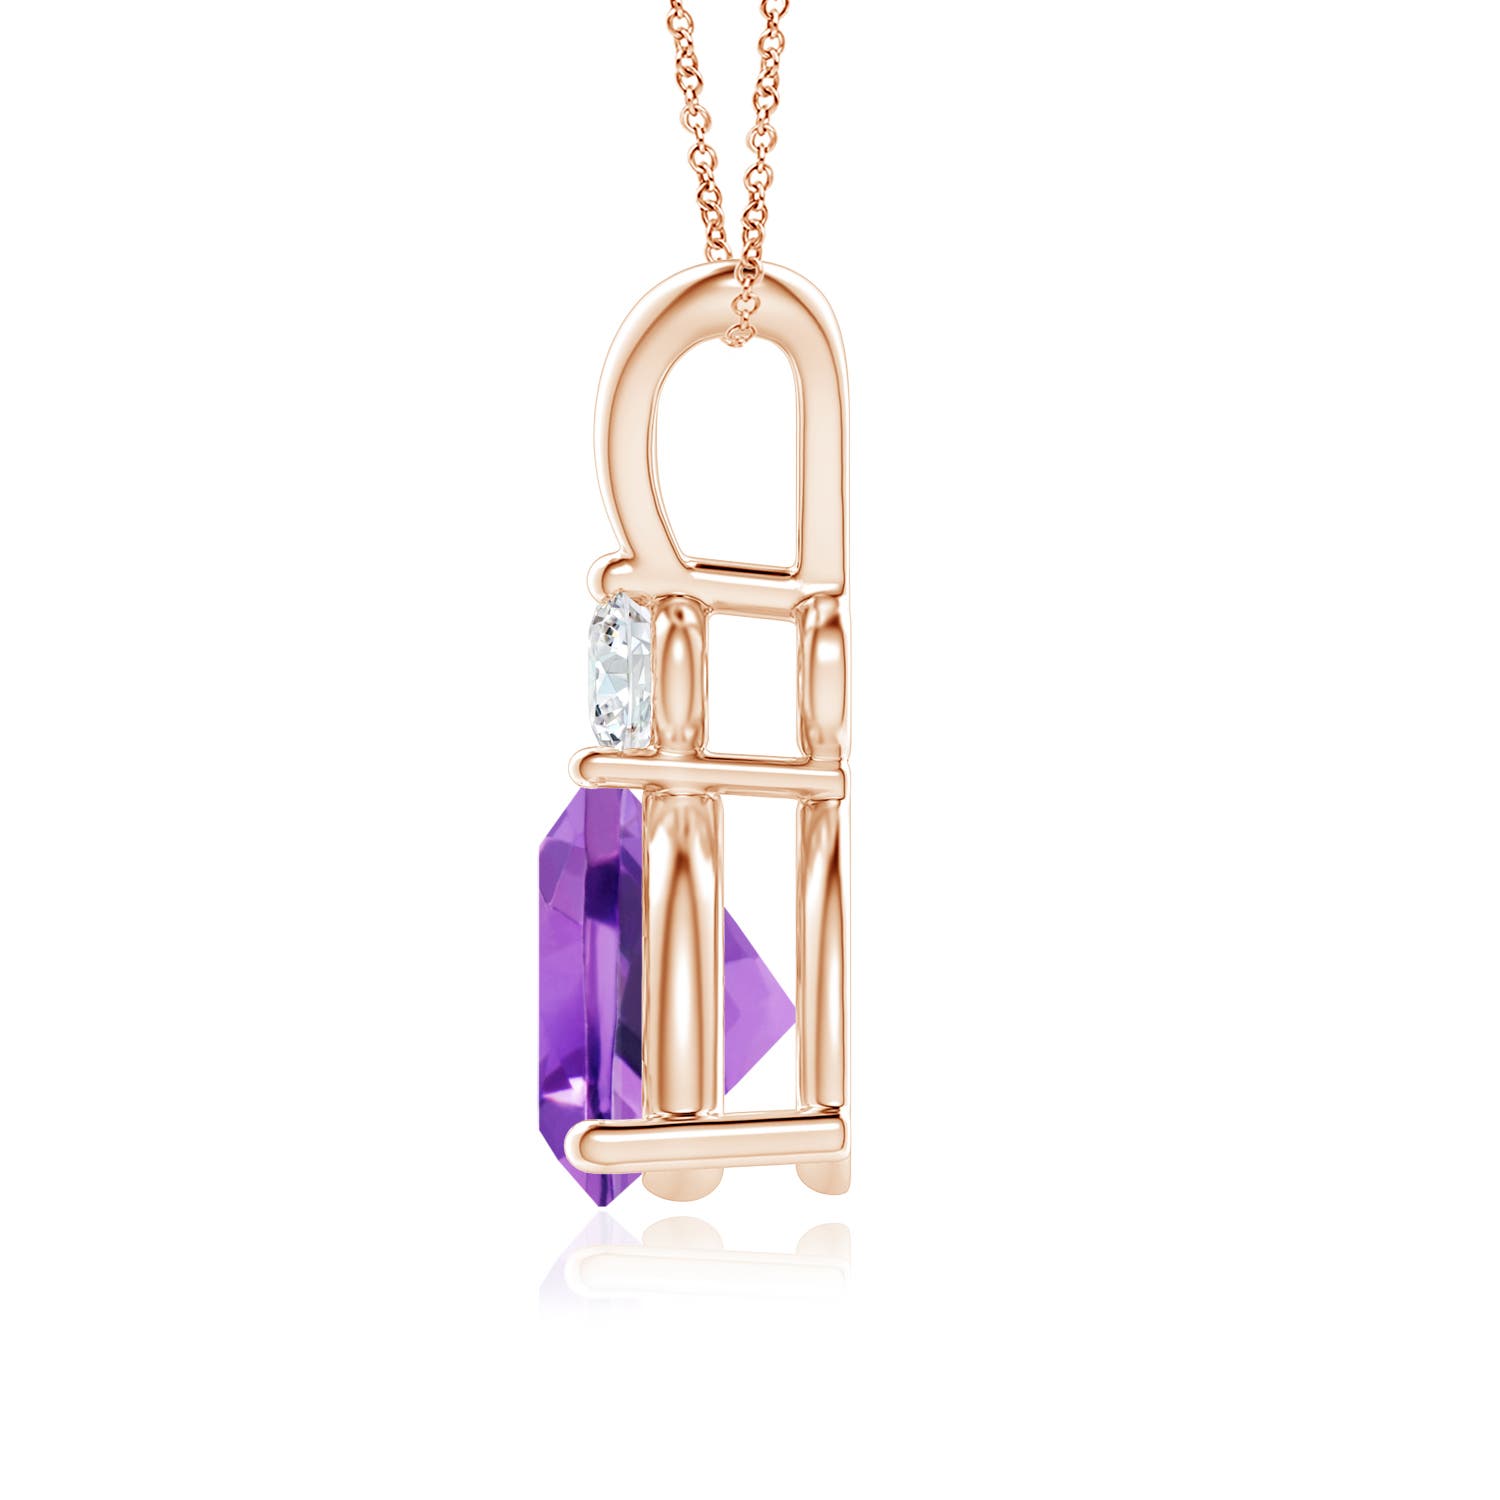 AA - Amethyst / 1.21 CT / 14 KT Rose Gold